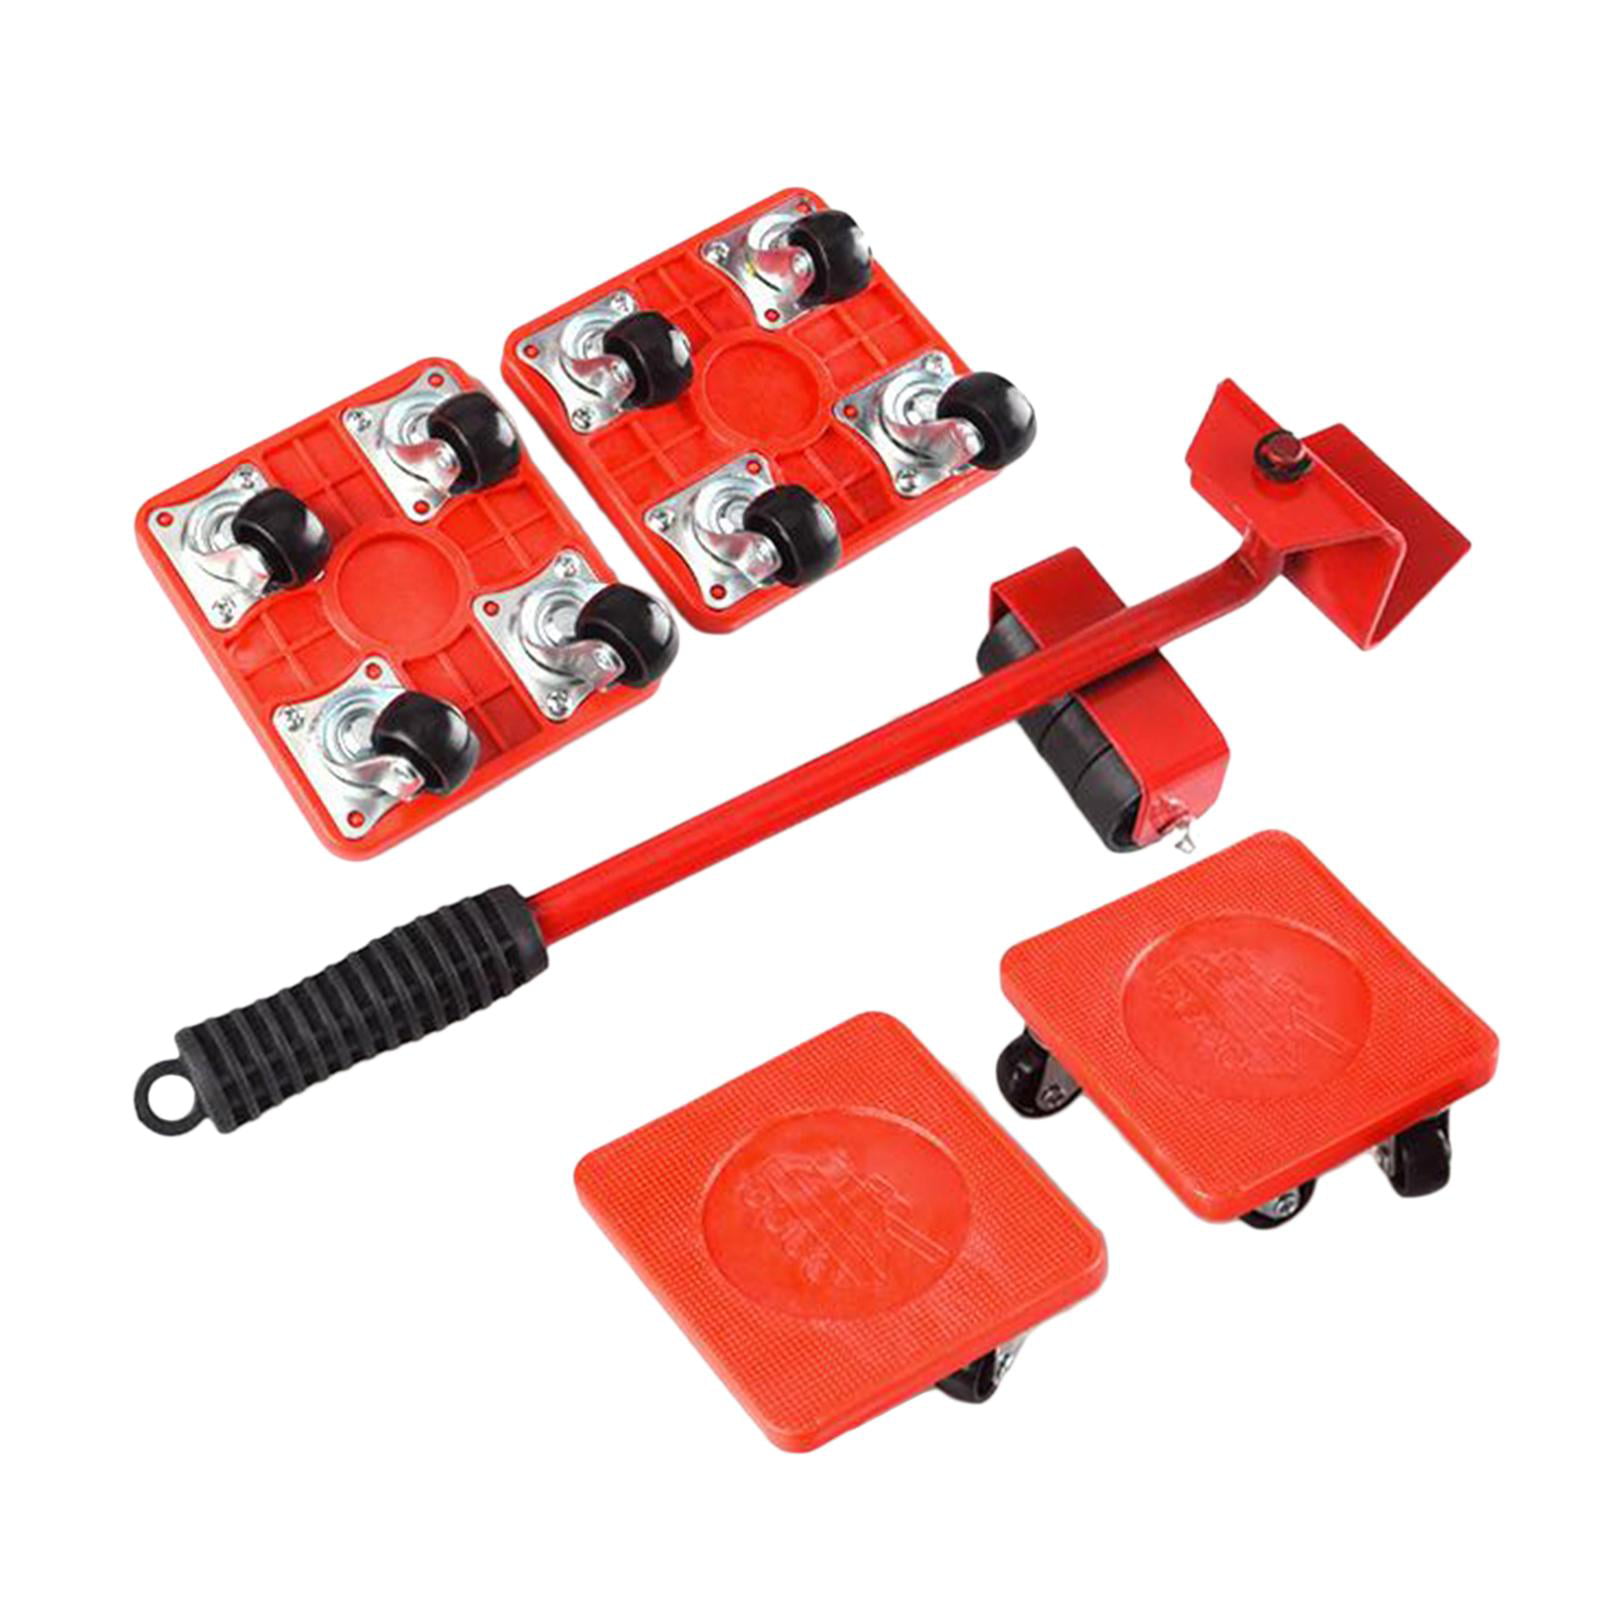 TSR Home Heavy Duty Furniture Lifter - 4 Set Sliders with 8 Wheel Each